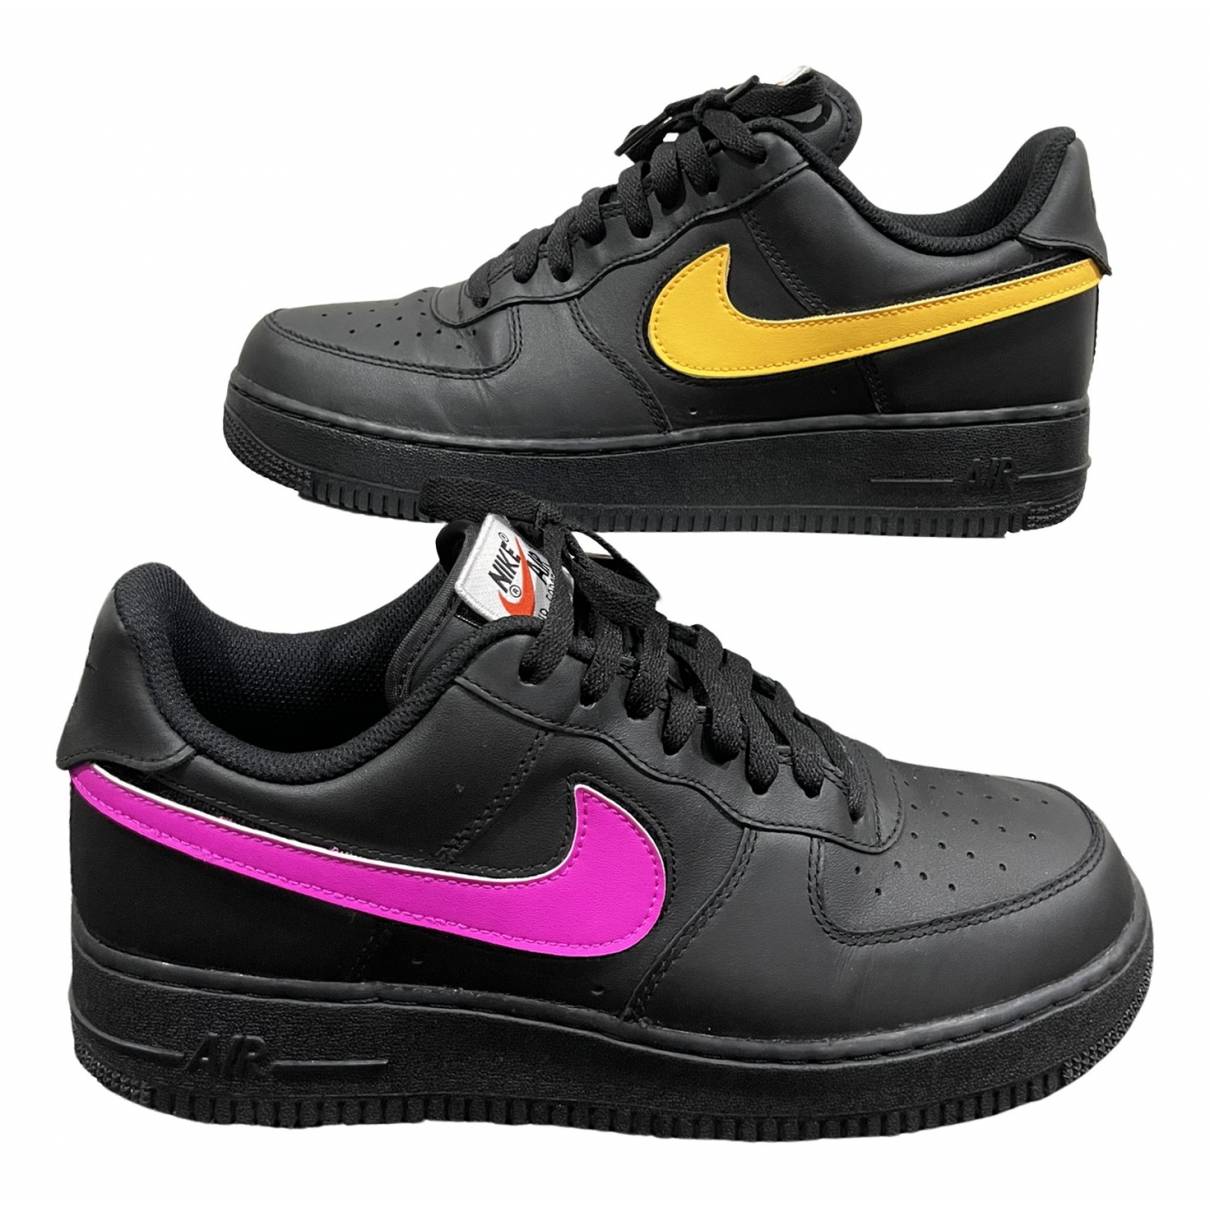 Goteo Espacioso Mal humor Air force 1 leather low trainers Nike Black size 10 US in Leather - 25592812